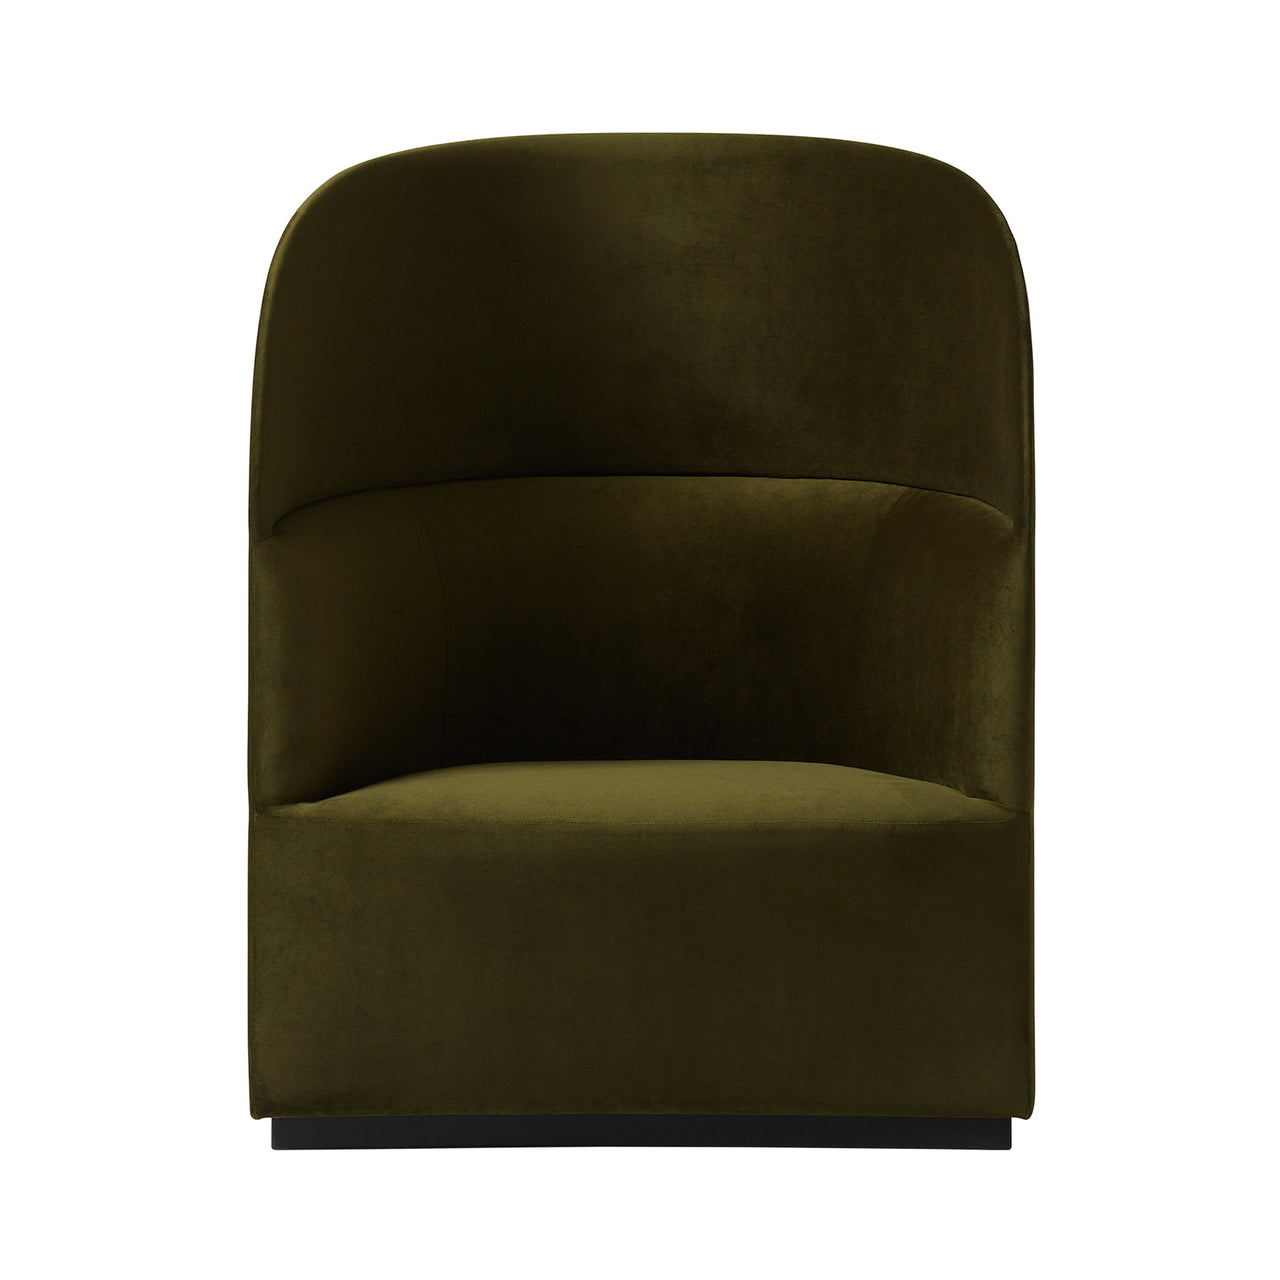 Tearoom High Back Lounge Chair: Without Power Outlet + Champion 035